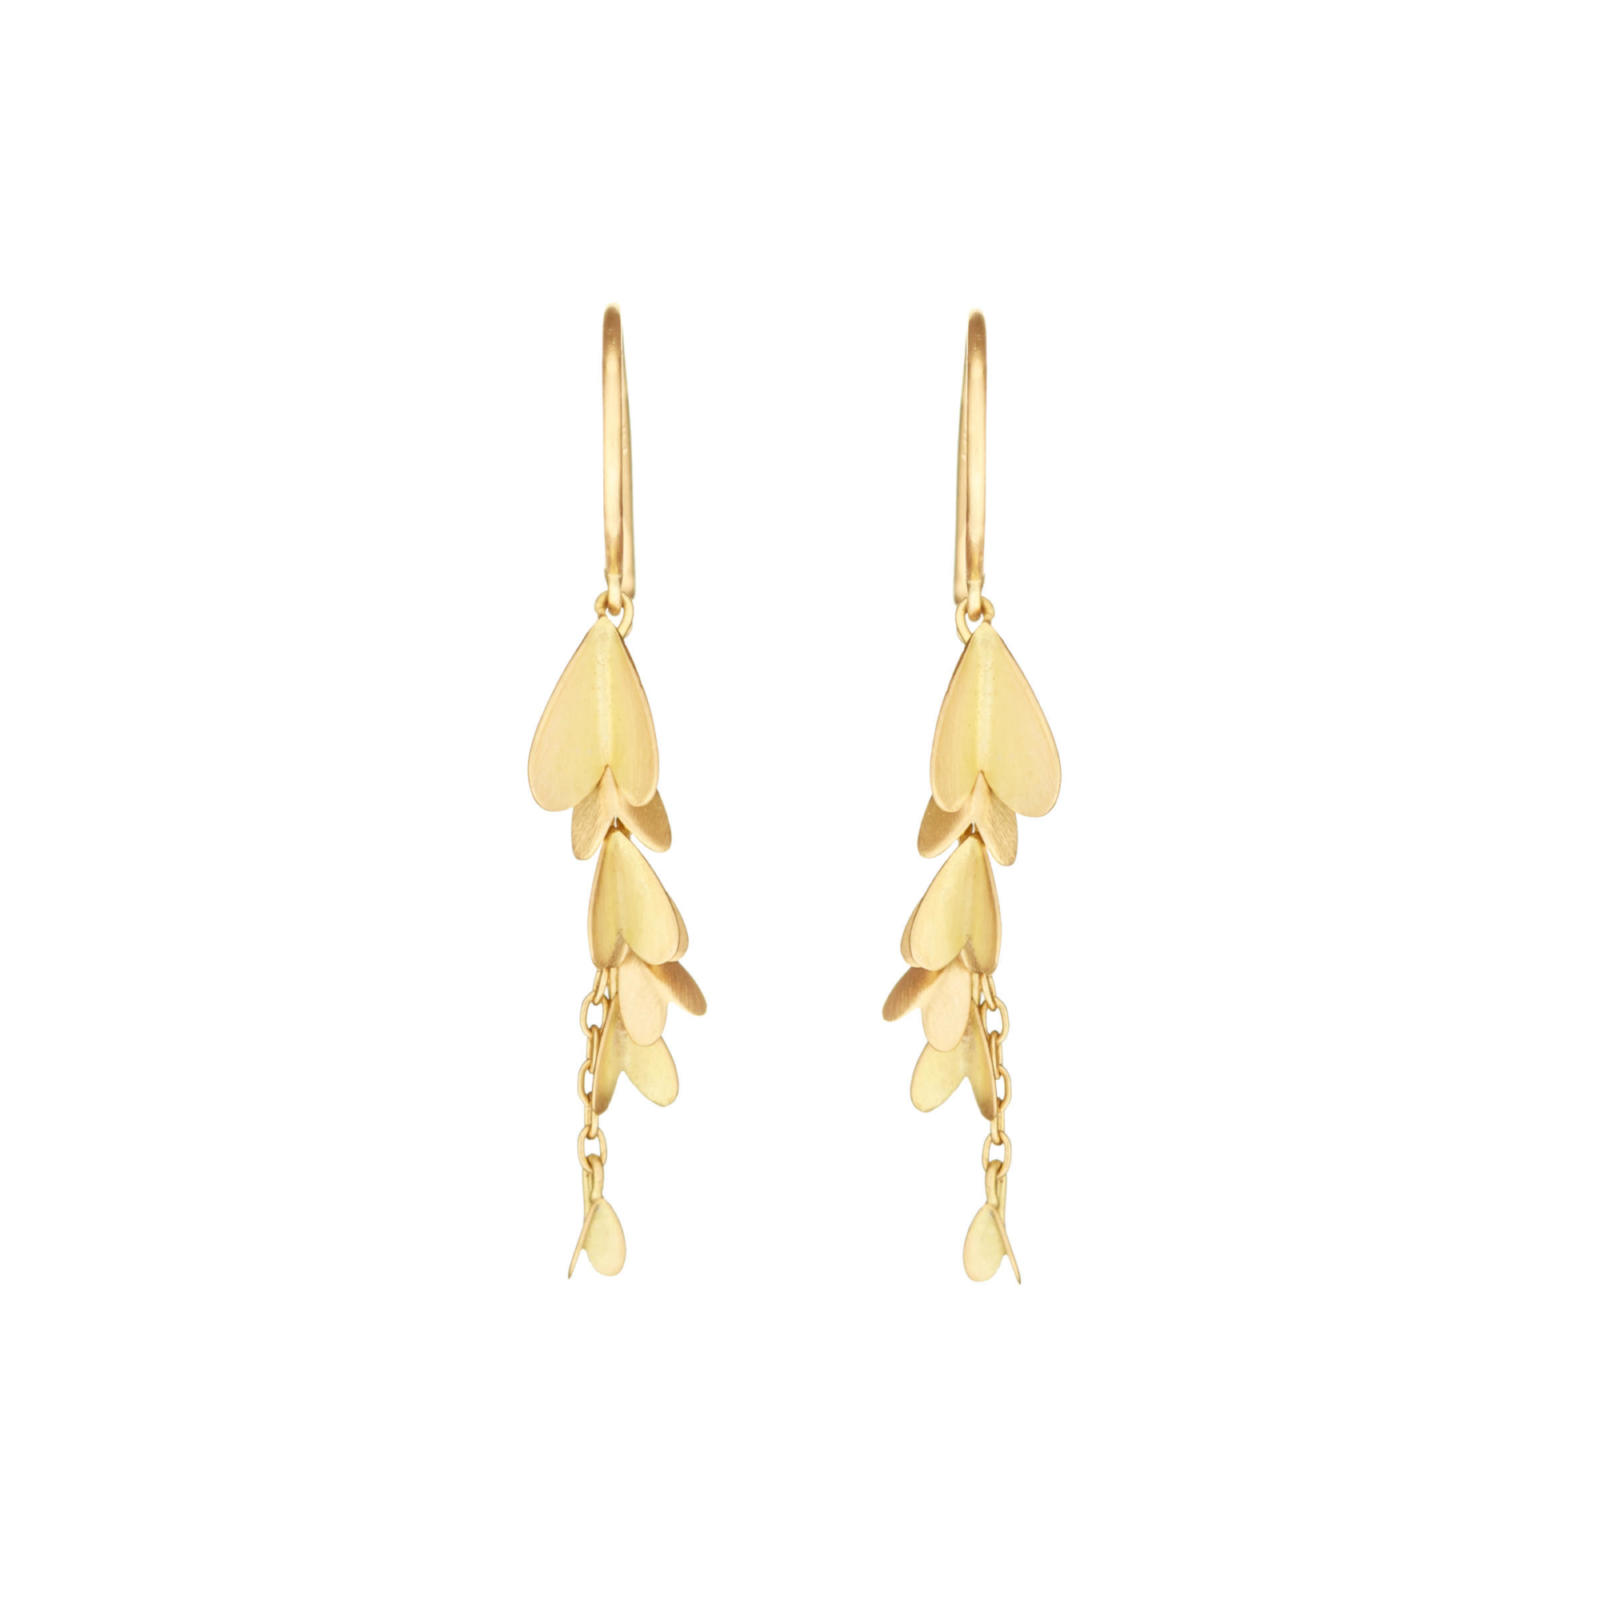 Sia Taylor ME7 Y Yellow Gold Earrings WB